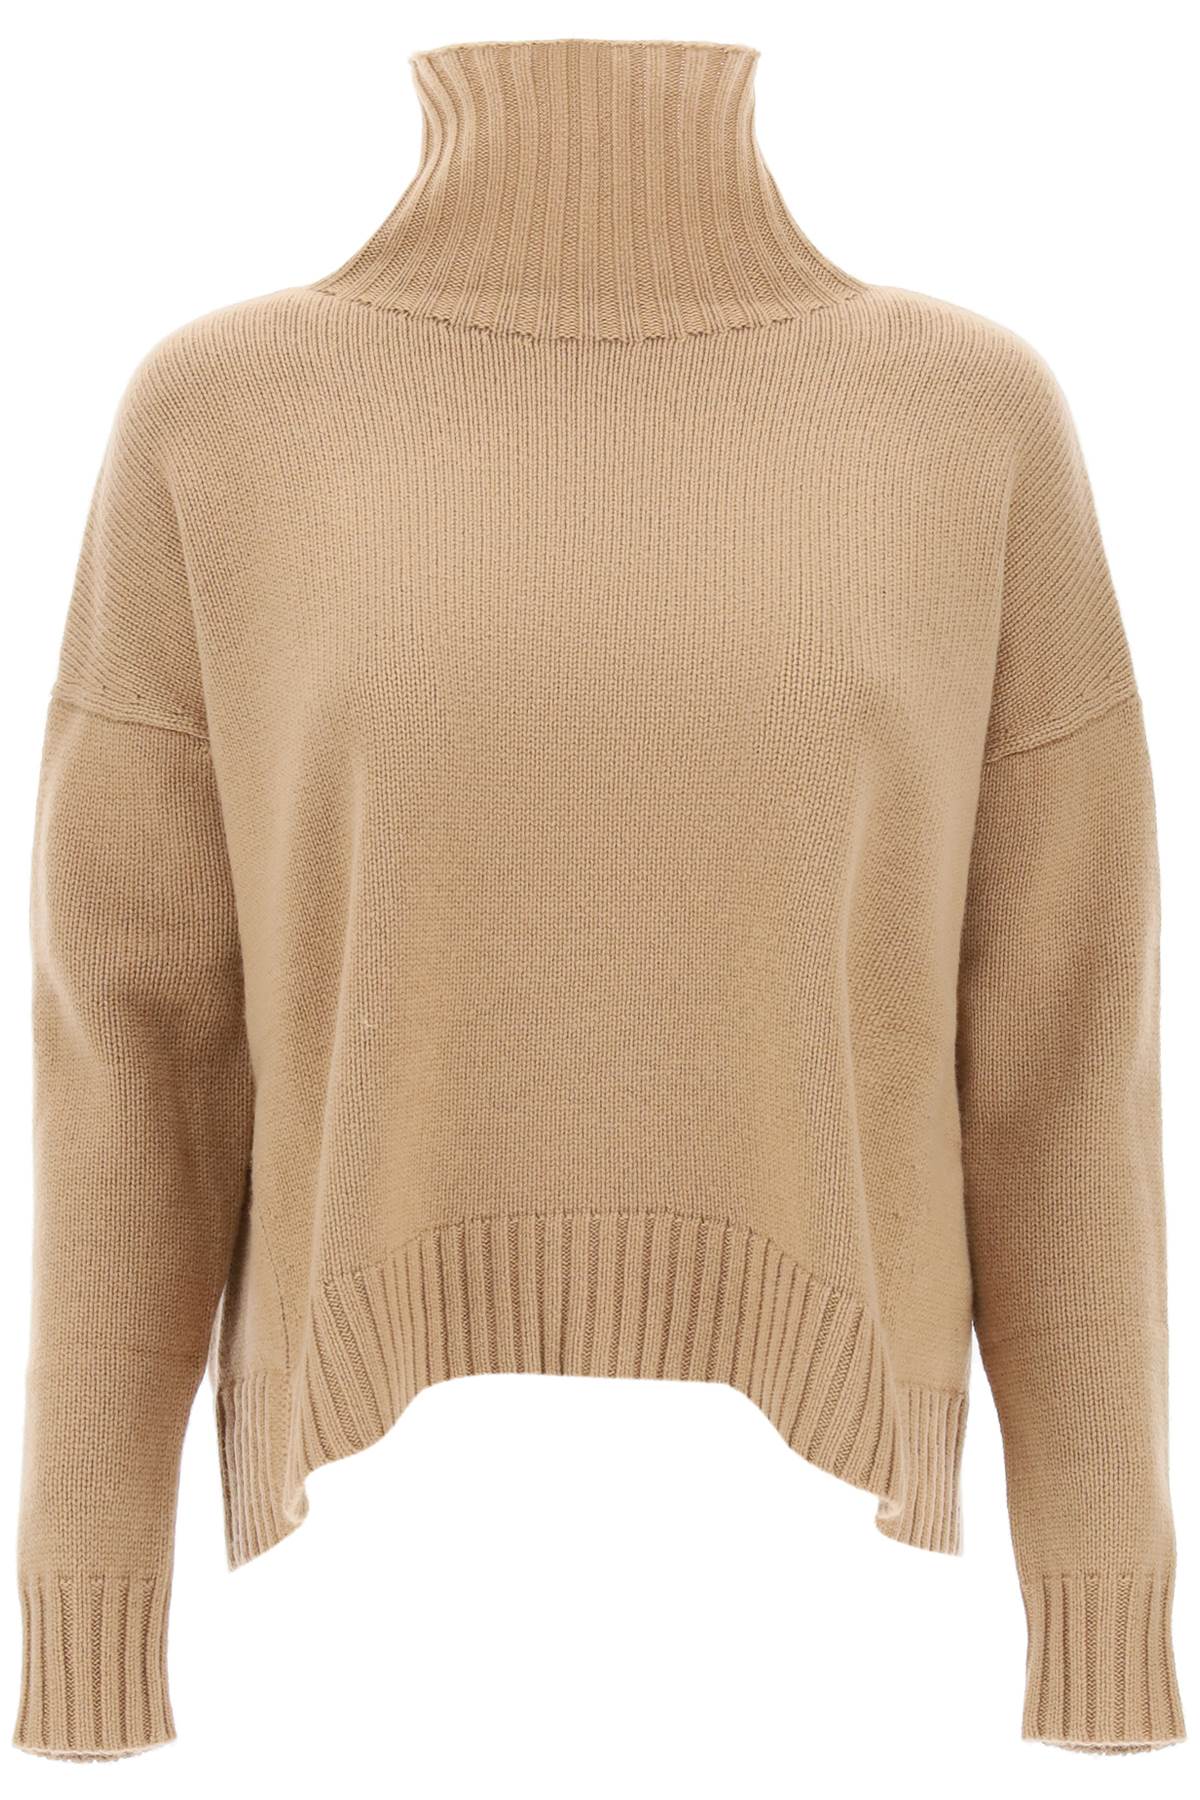 Max Mara 'gianna' Wool And Cashmere Funnel-neck Jumper In Camel